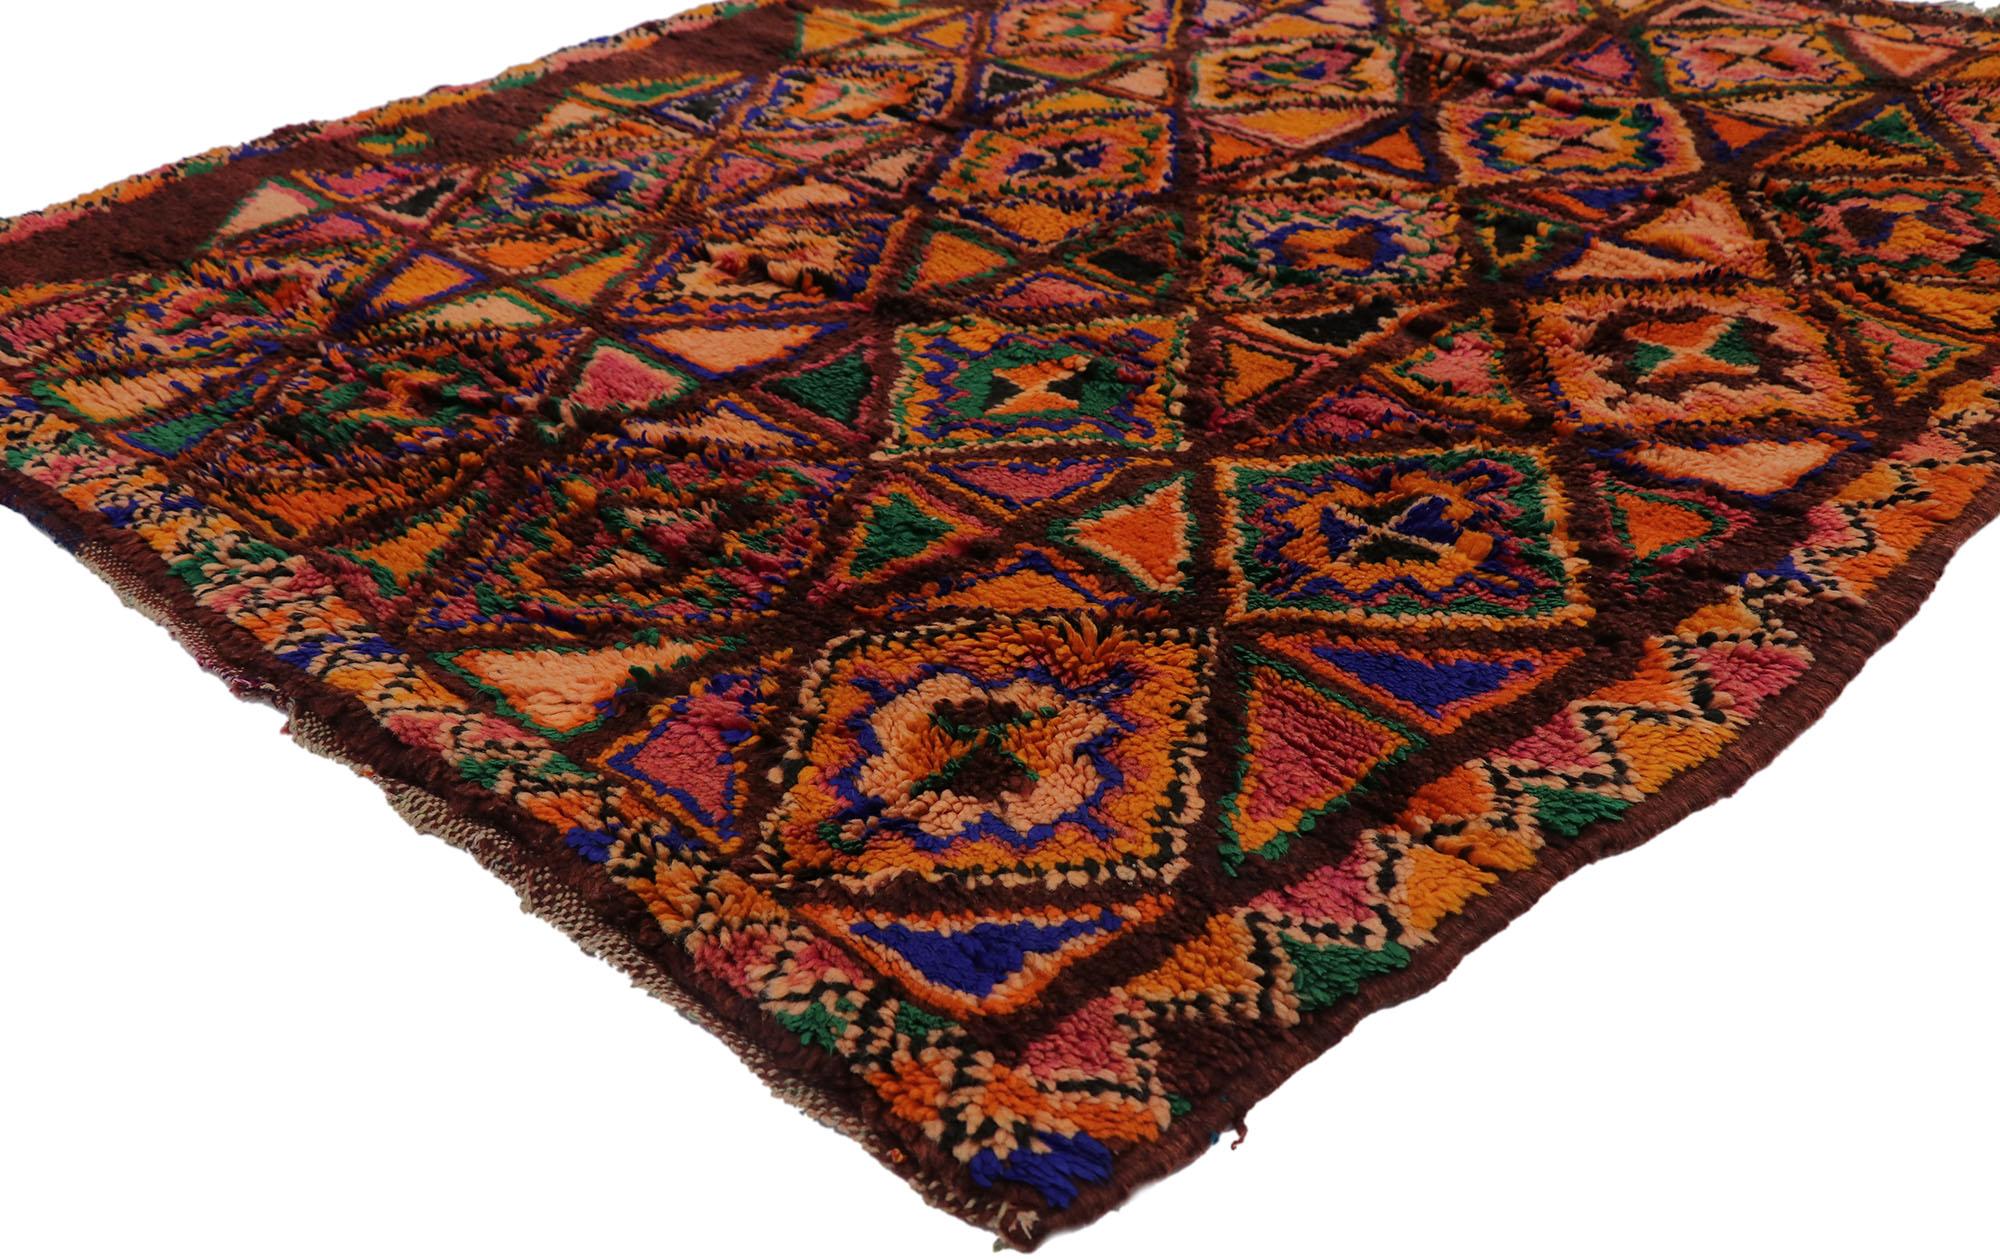 21665 Vintage Berber Boujad Moroccan rug with Boho Chic Tribal Style 04'04 x 05'03. Showcasing a bold expressive design, incredible detail and texture, this hand knotted wool vintage Berber Boujad Moroccan rug is a captivating vision of woven